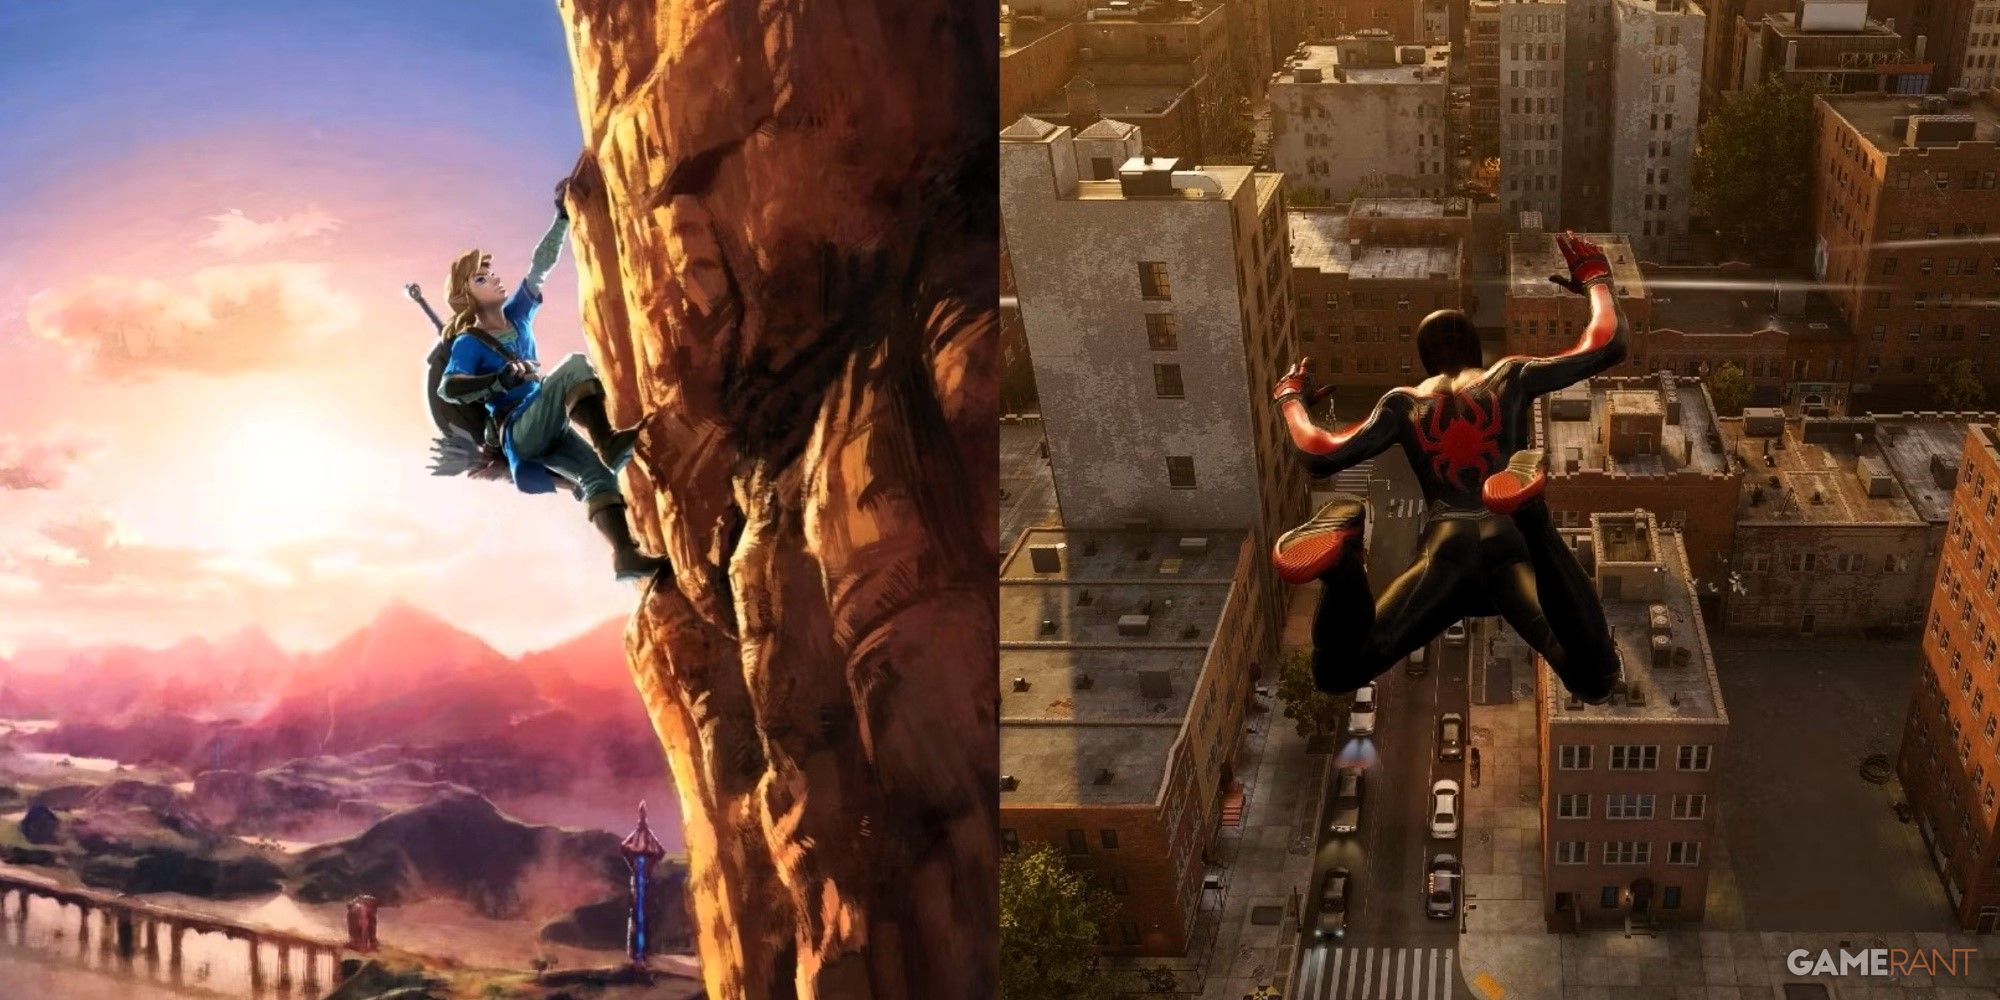 Link from Legend of Zelda and Miles Morales from Spider-Man